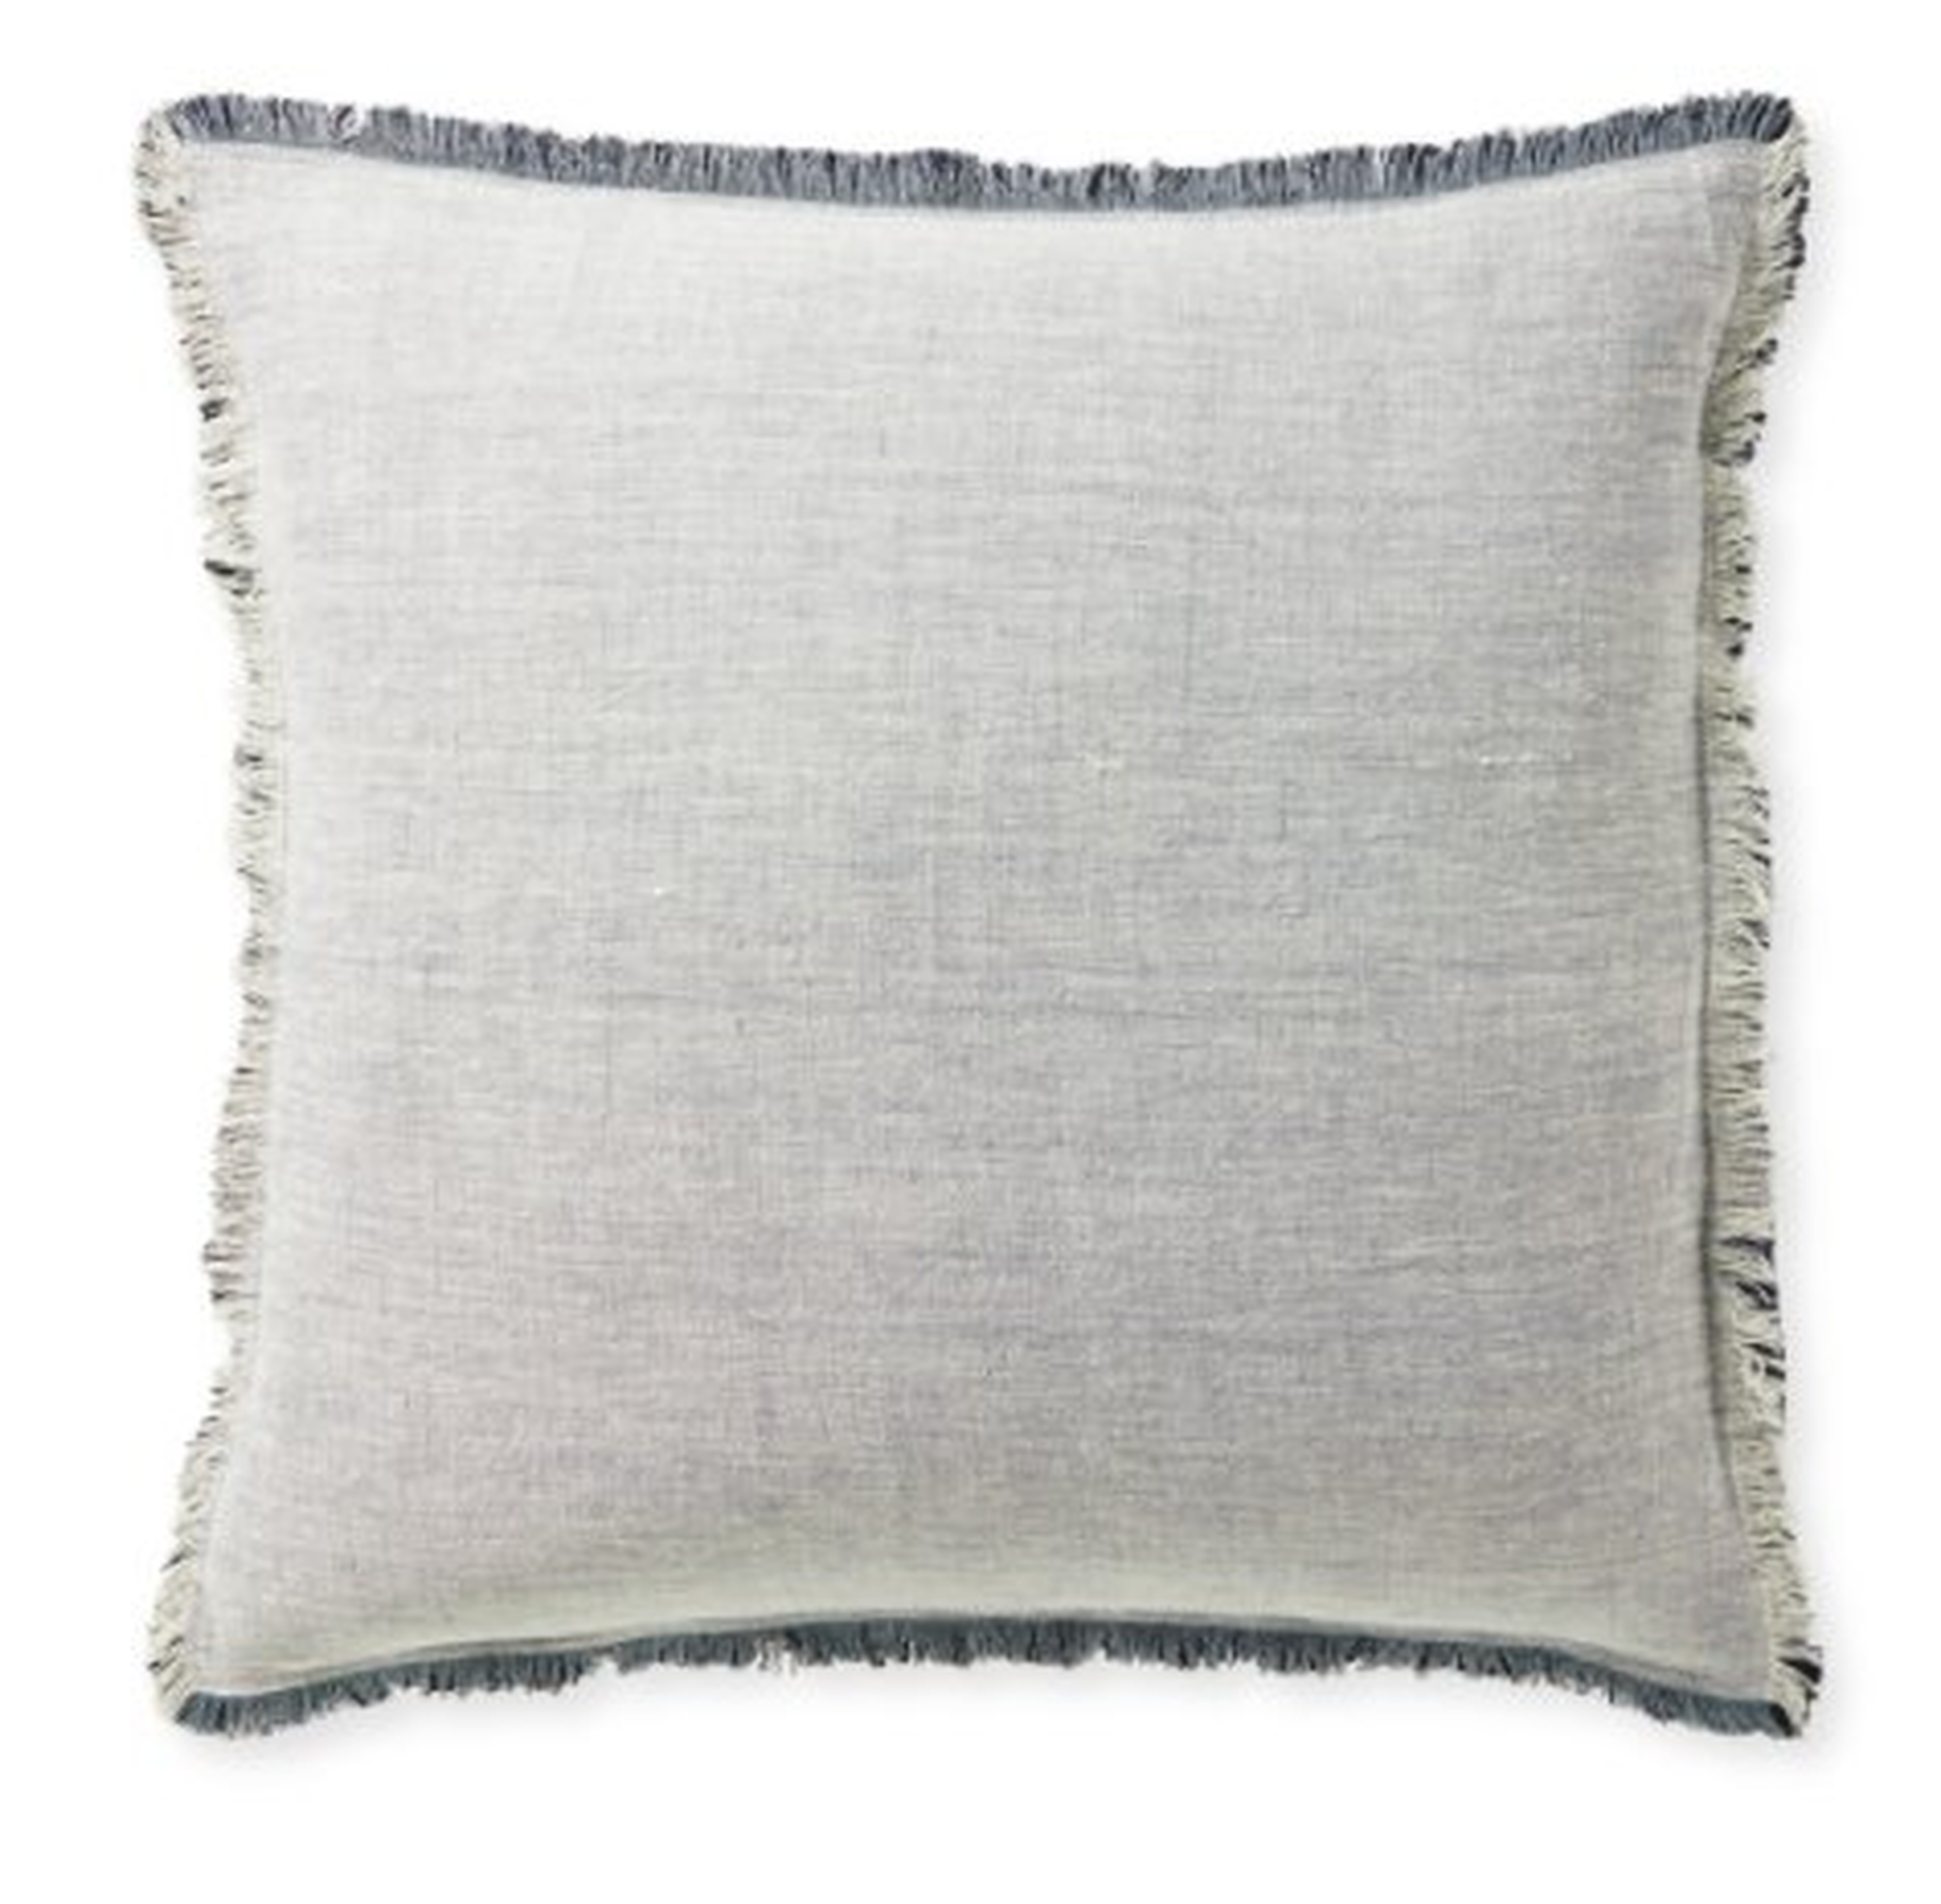 Avalis Pillow Cover - Serena and Lily